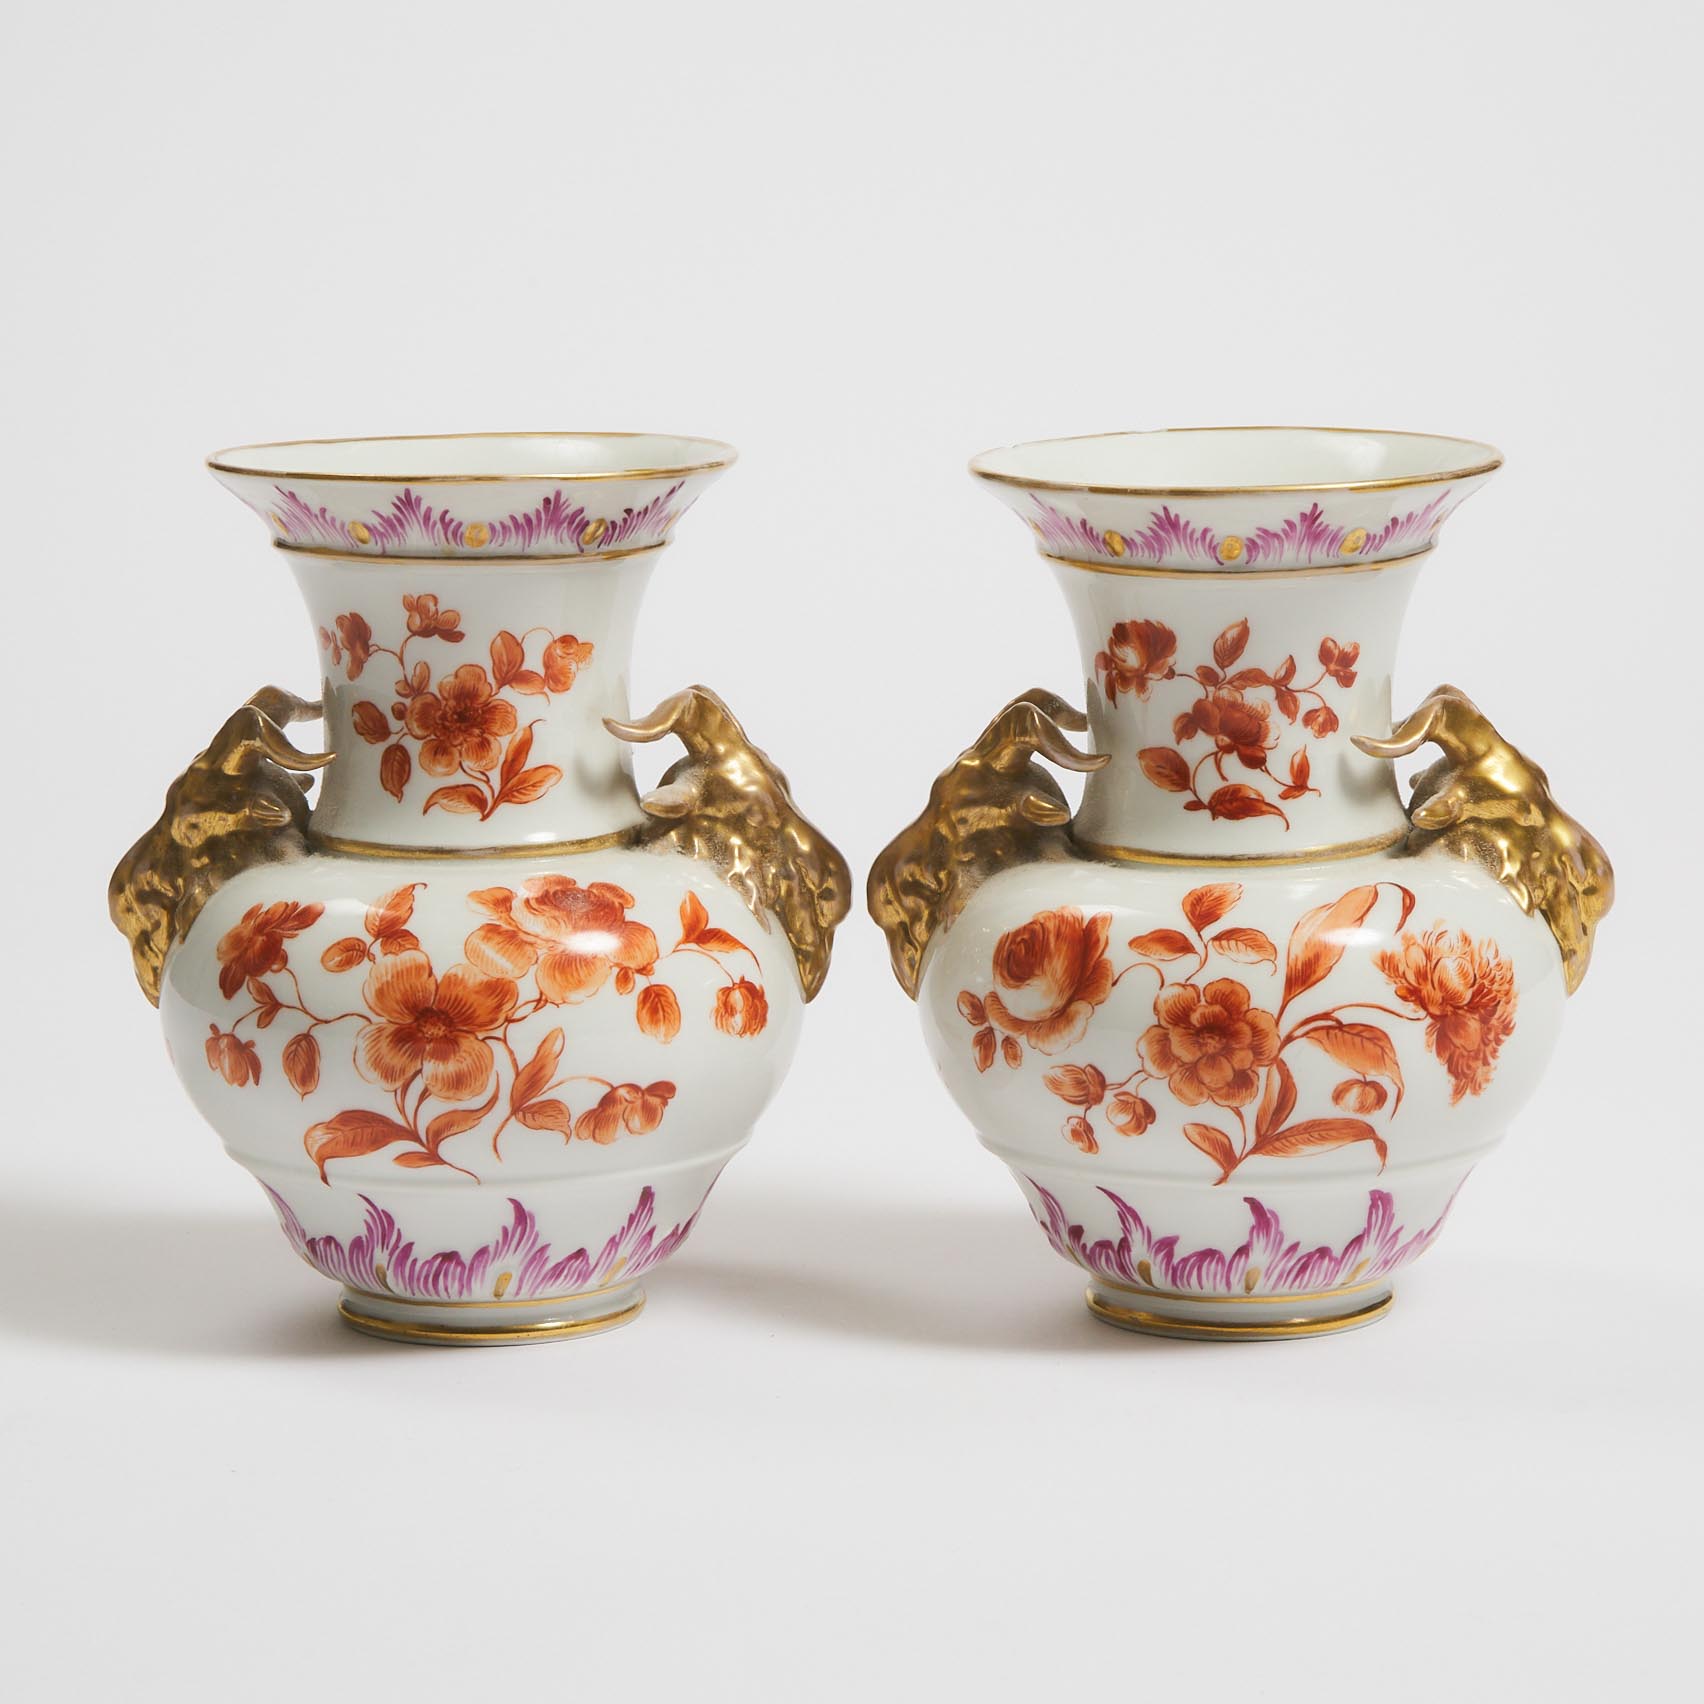 Pair of Berlin Two-Handled Vases, late 19th/early 20th century